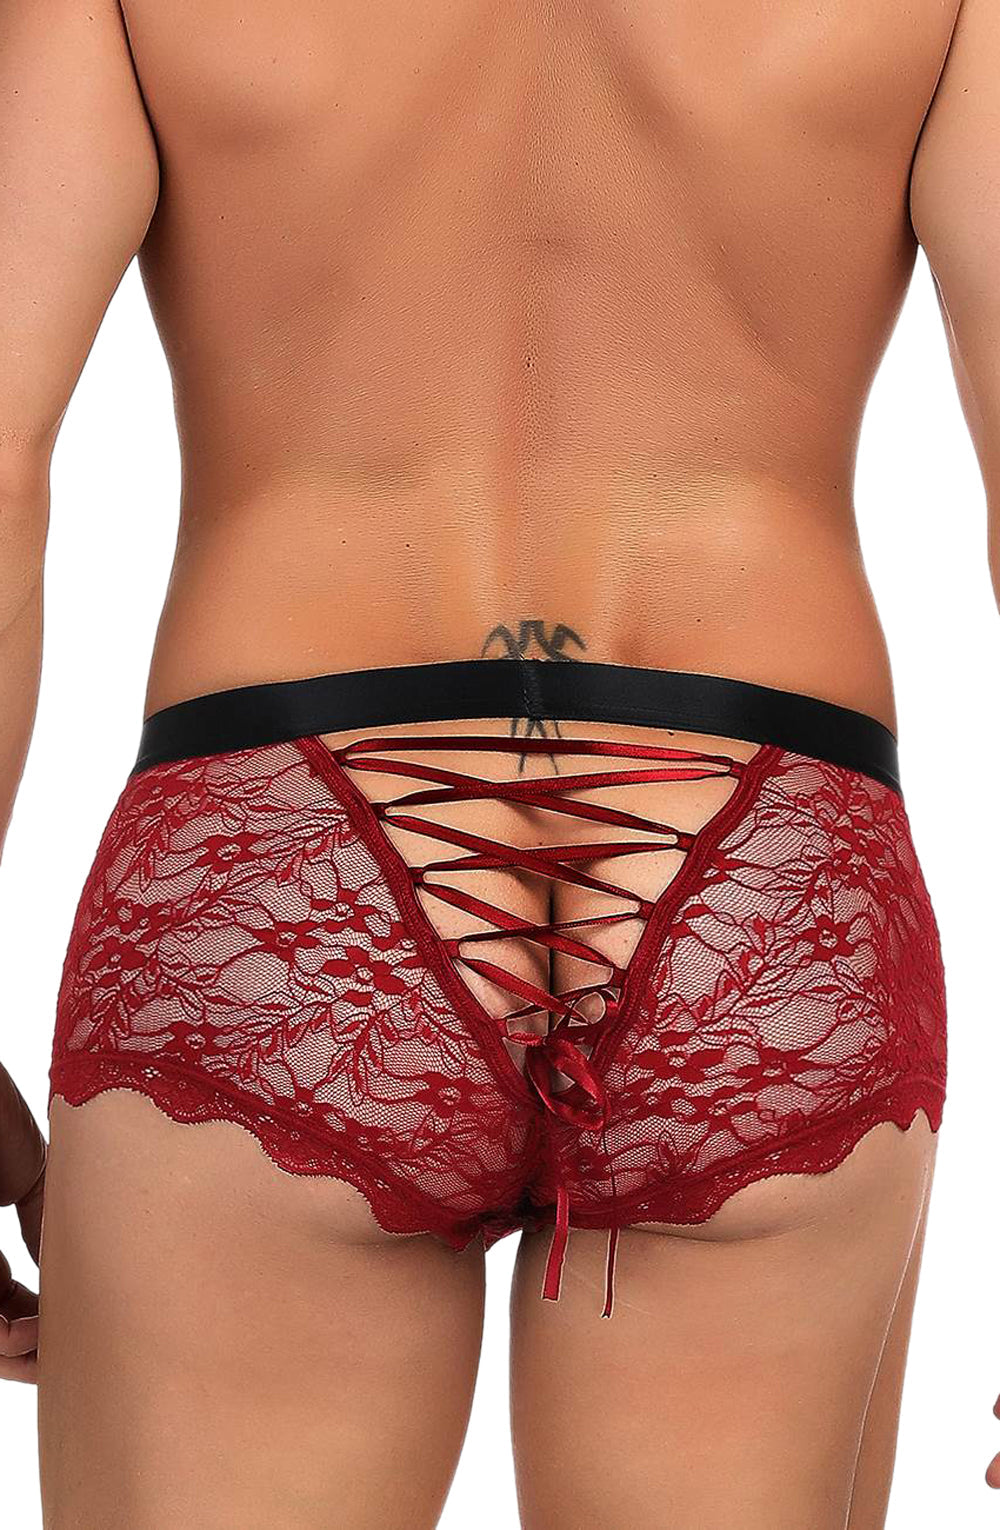 Vibrators, Sex Toy Kits and Sex Toys at Cloud9Adults - YesX YX976 Mens Boxer Brief Red/Black - Buy Sex Toys Online